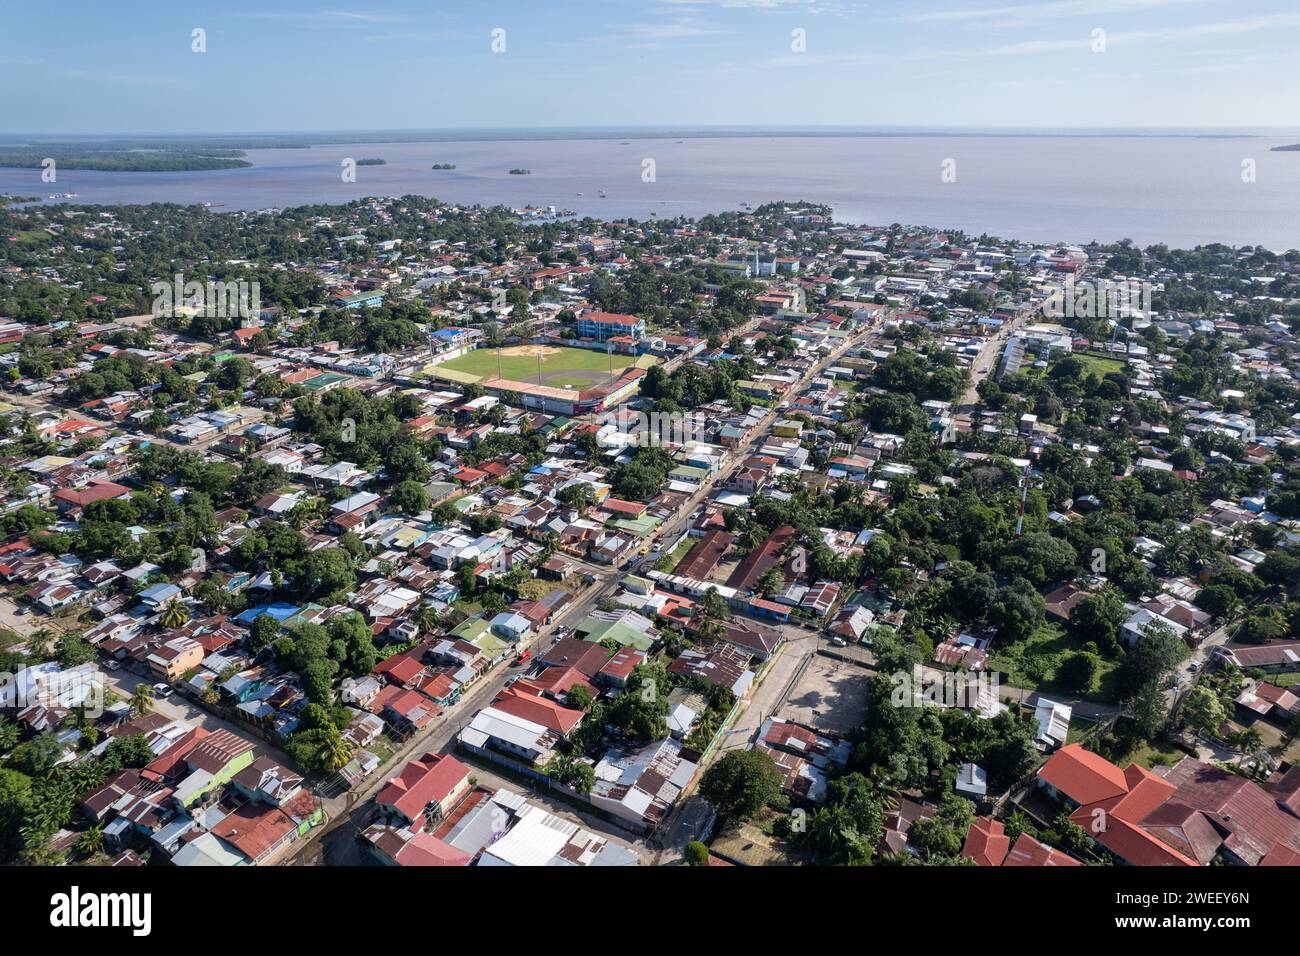 Stadium for baseball in Caribbean town aerial drone view Stock Photo